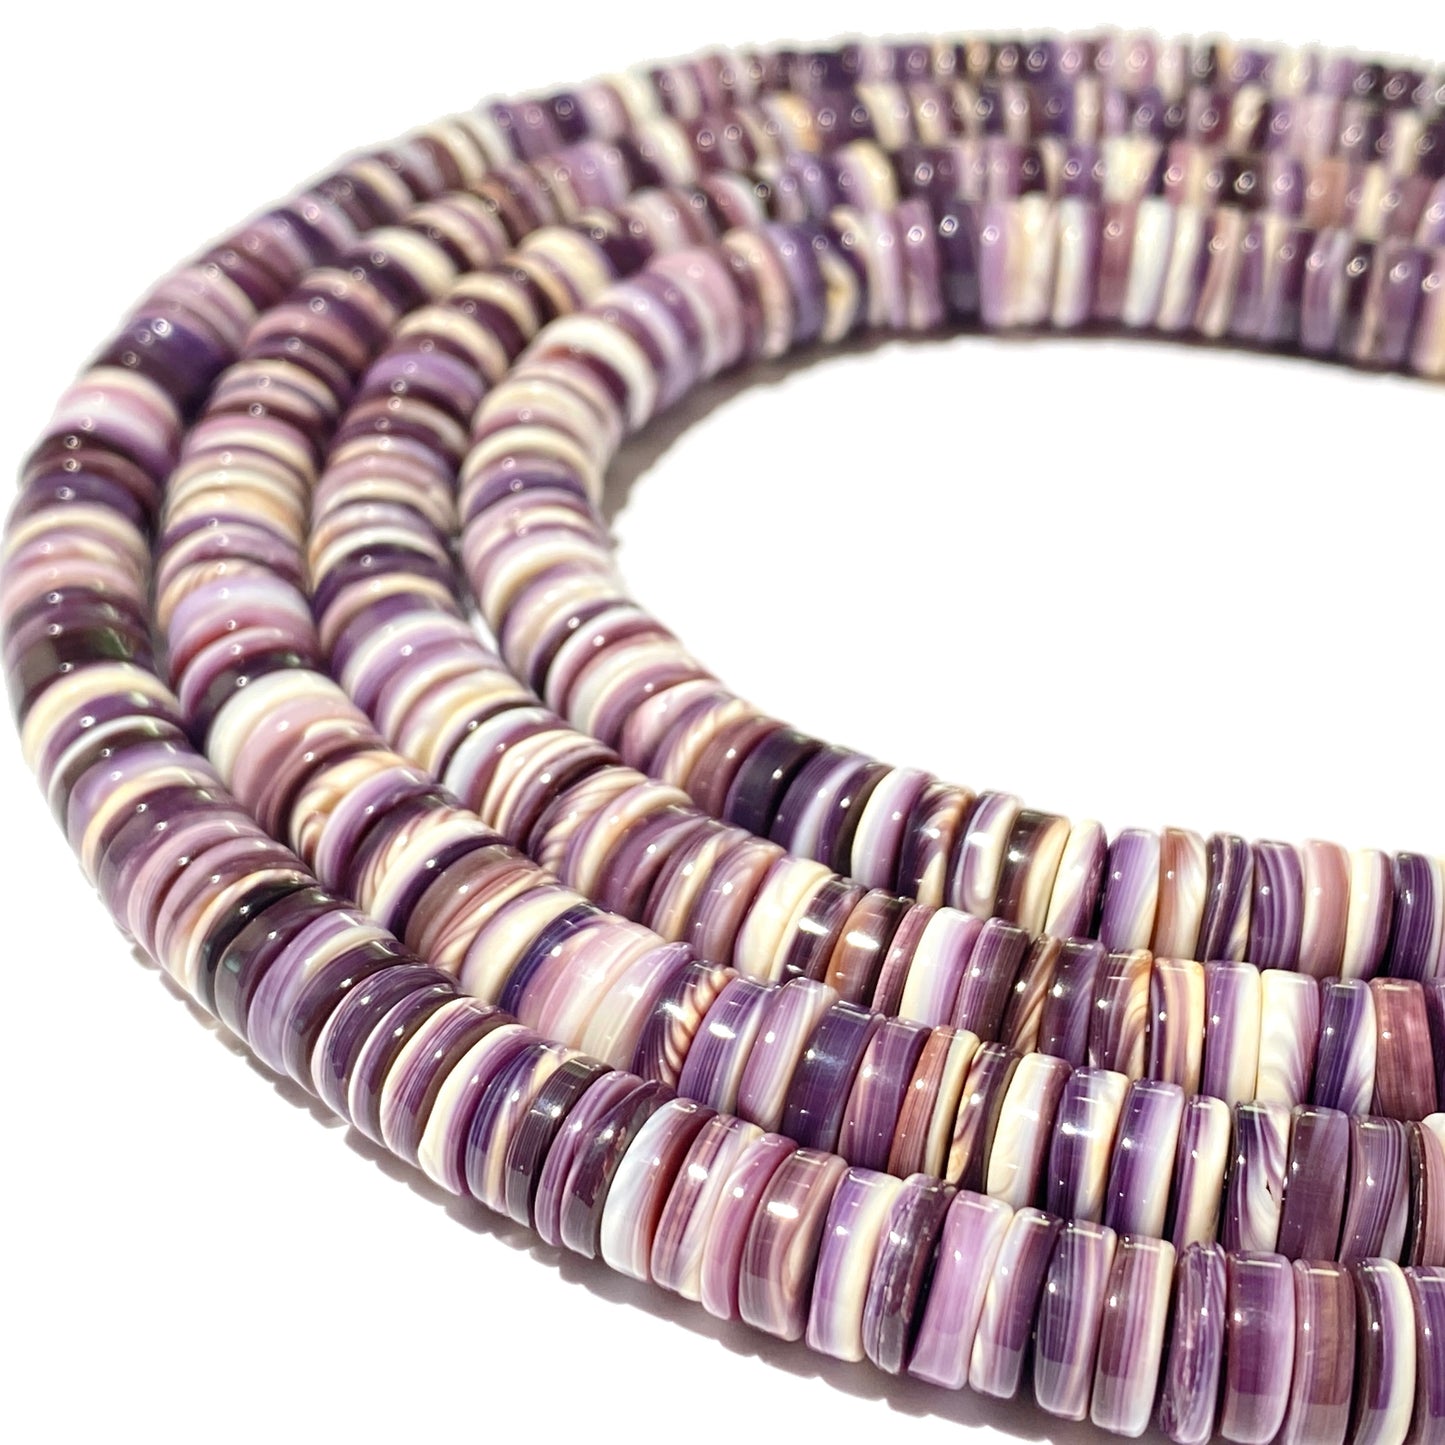 Lavender Wampum Shell Beads From New England/ Rhode Island (America's First Currency From Year 1637-1673) Smooth Heishi For DIY Jewelry Making